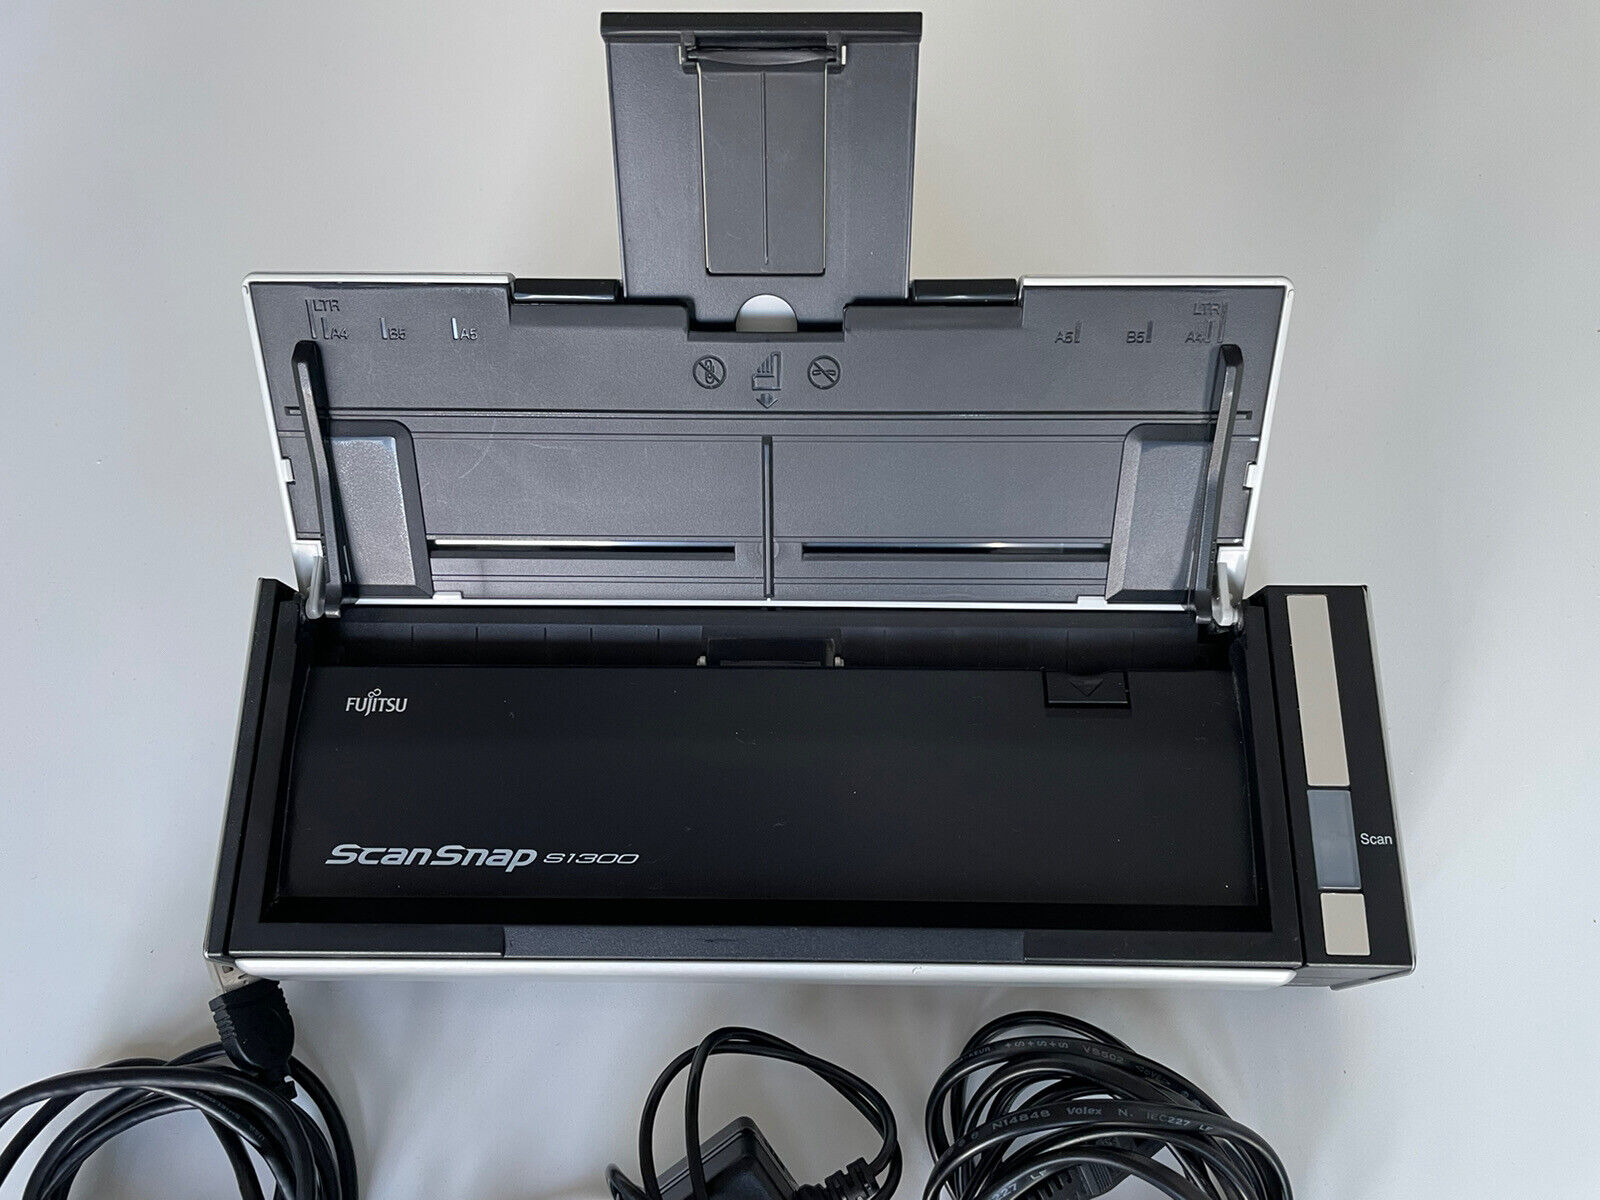 Fujitsu ScanSnap S1300 portable document scanner plus power supply and cables Tania wysoka ocena